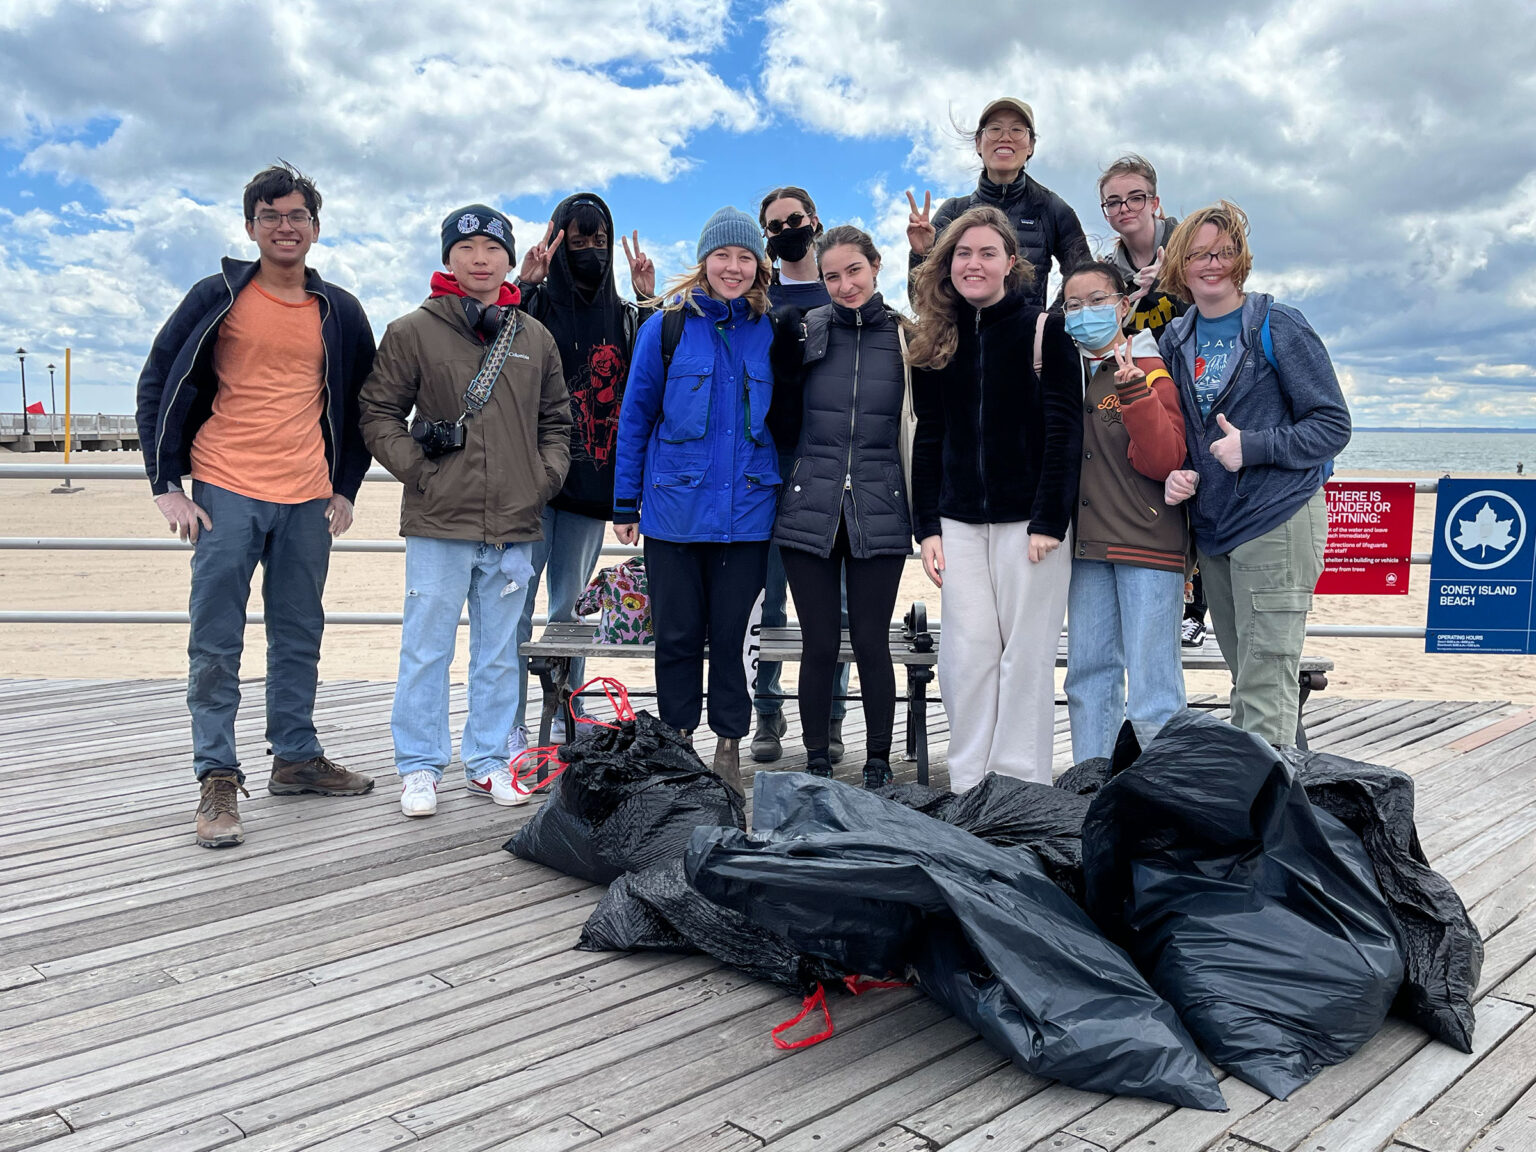 A group of people posing for the photo on the deck of the Coney Island Beach. There are a few trash bags in front of them, possibly implying that they were cleaning up the beach.